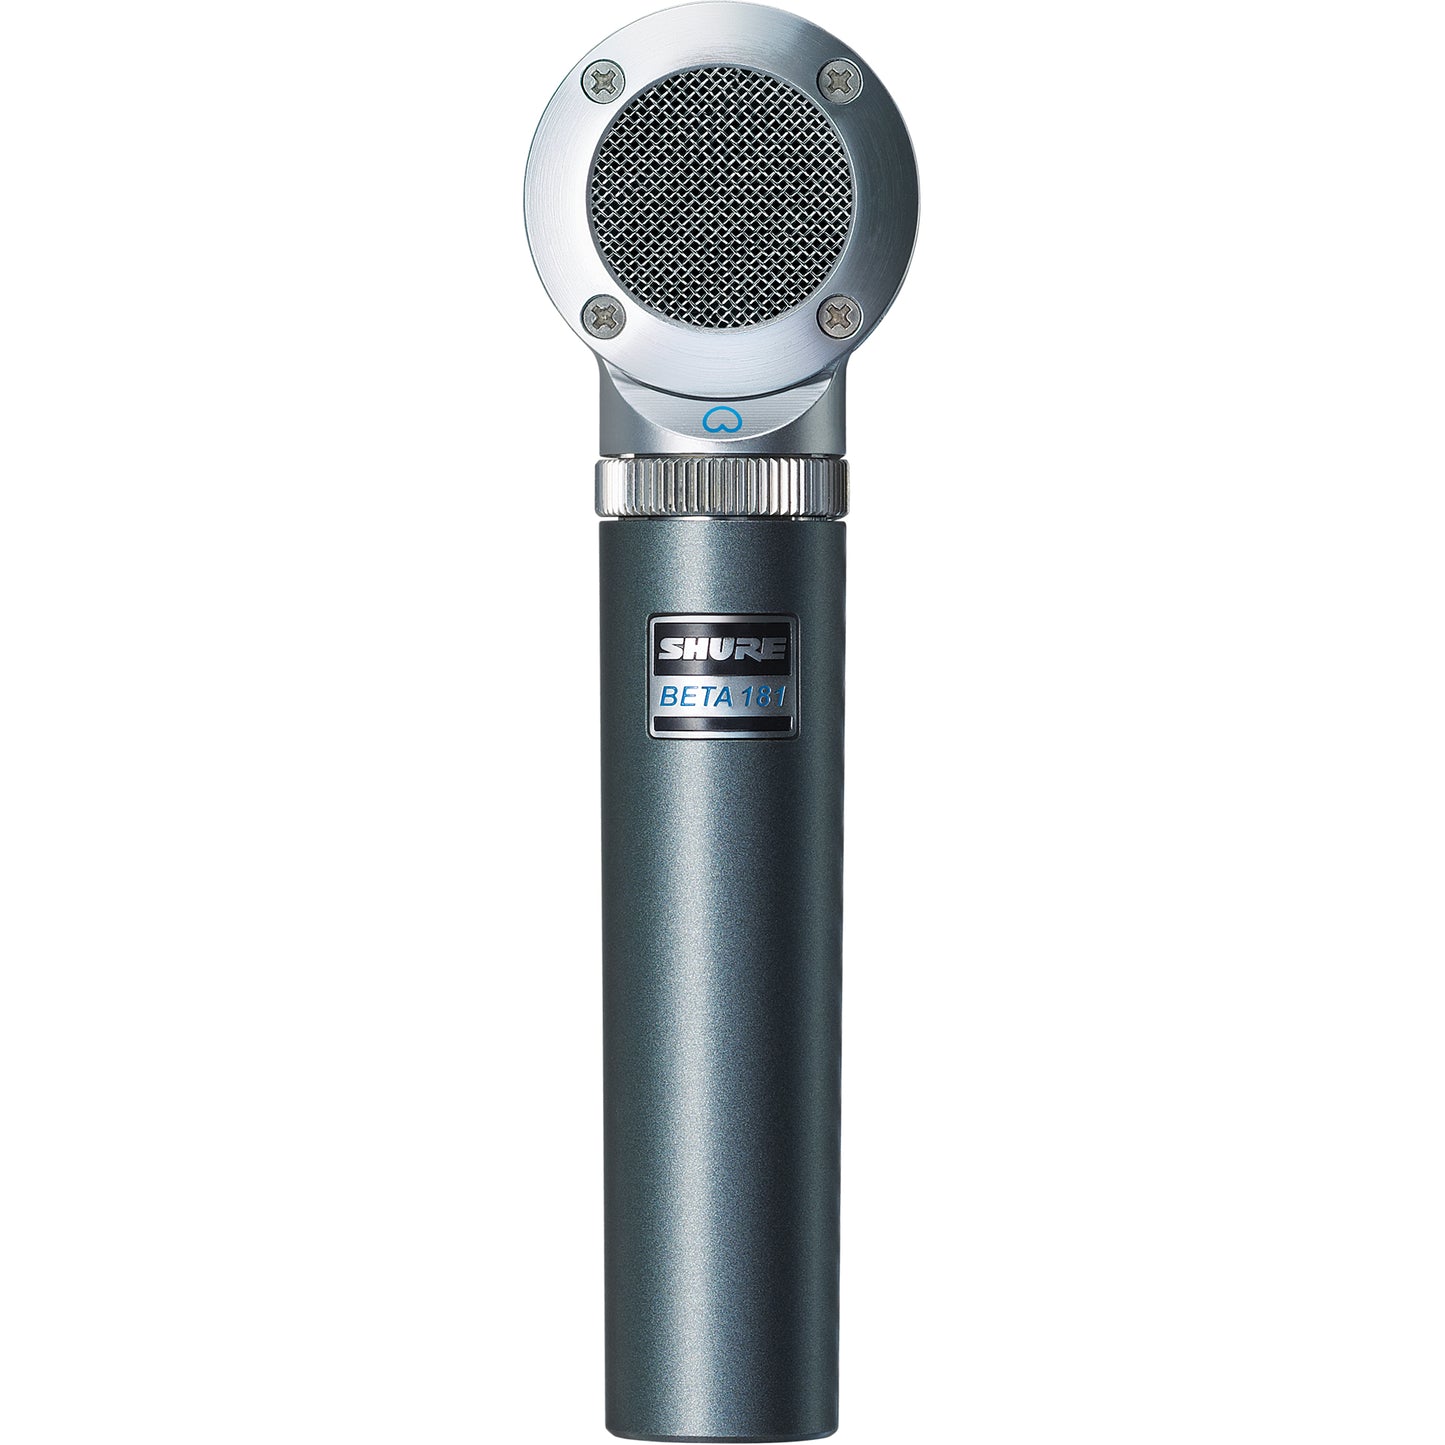 Shure BETA181/C Cardiod Ultra-Compact Side-Address Instrument Microphone